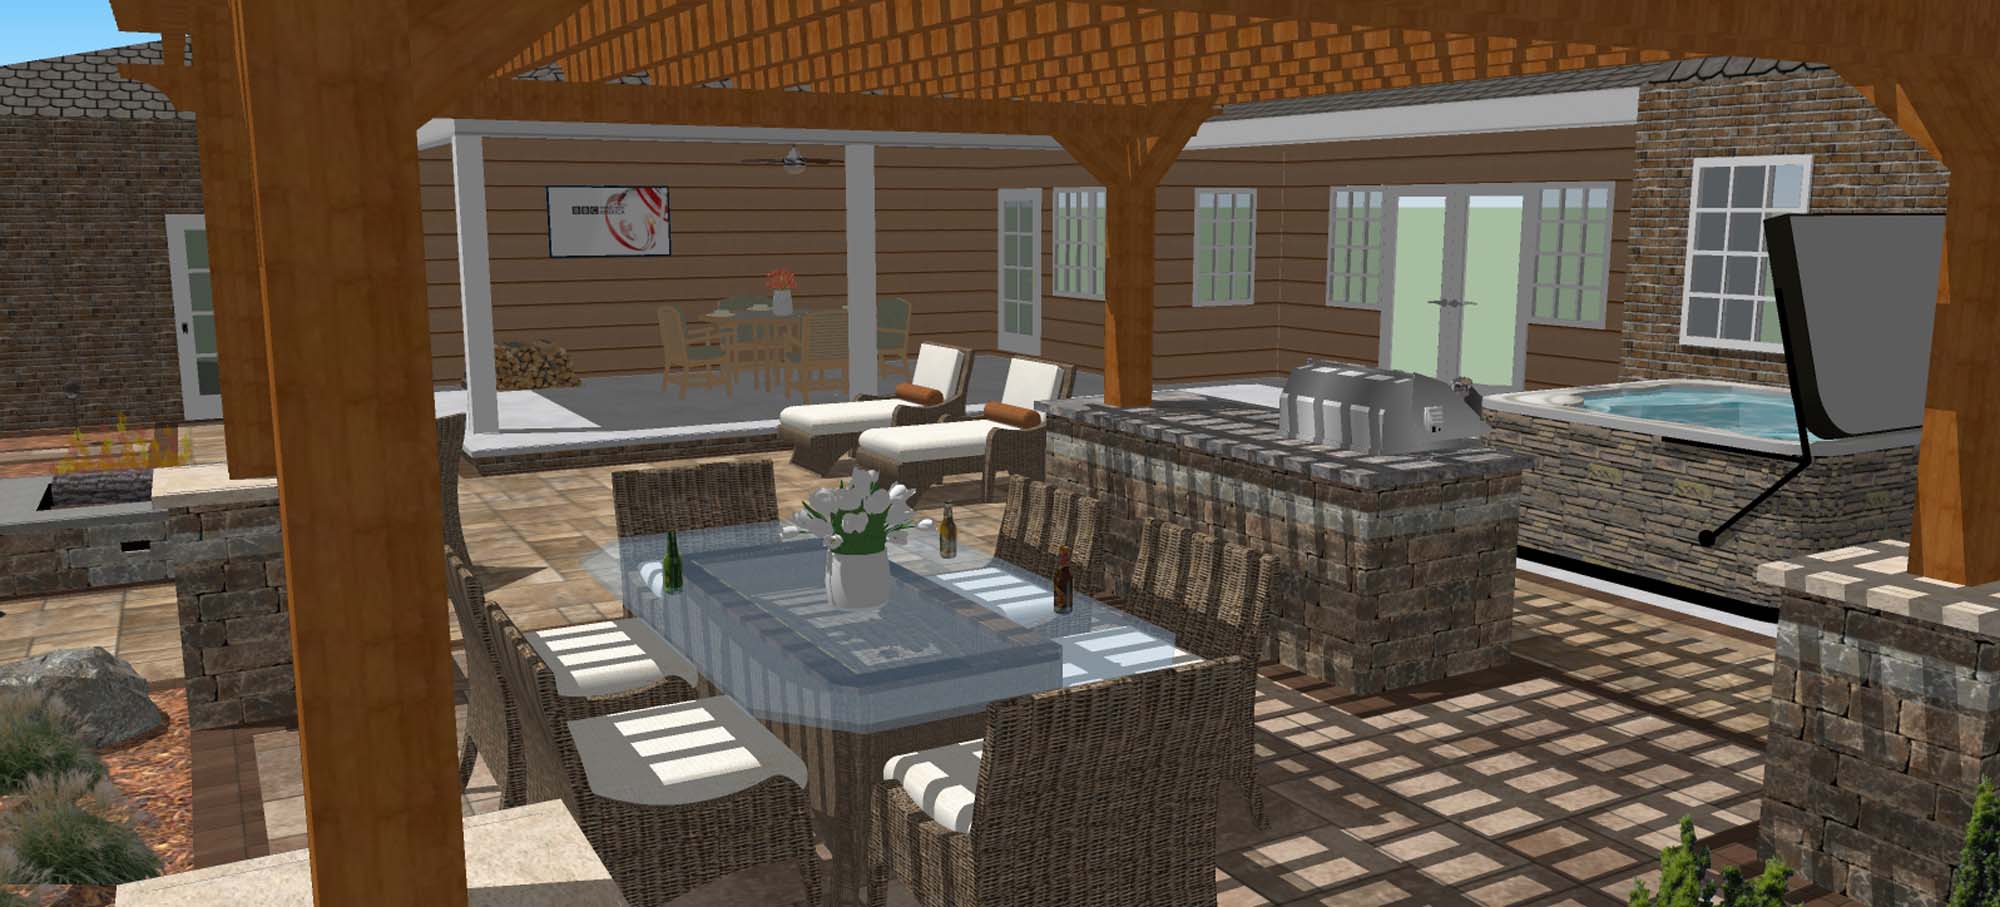 3D Image of Pergola and Outdoor Kitchen